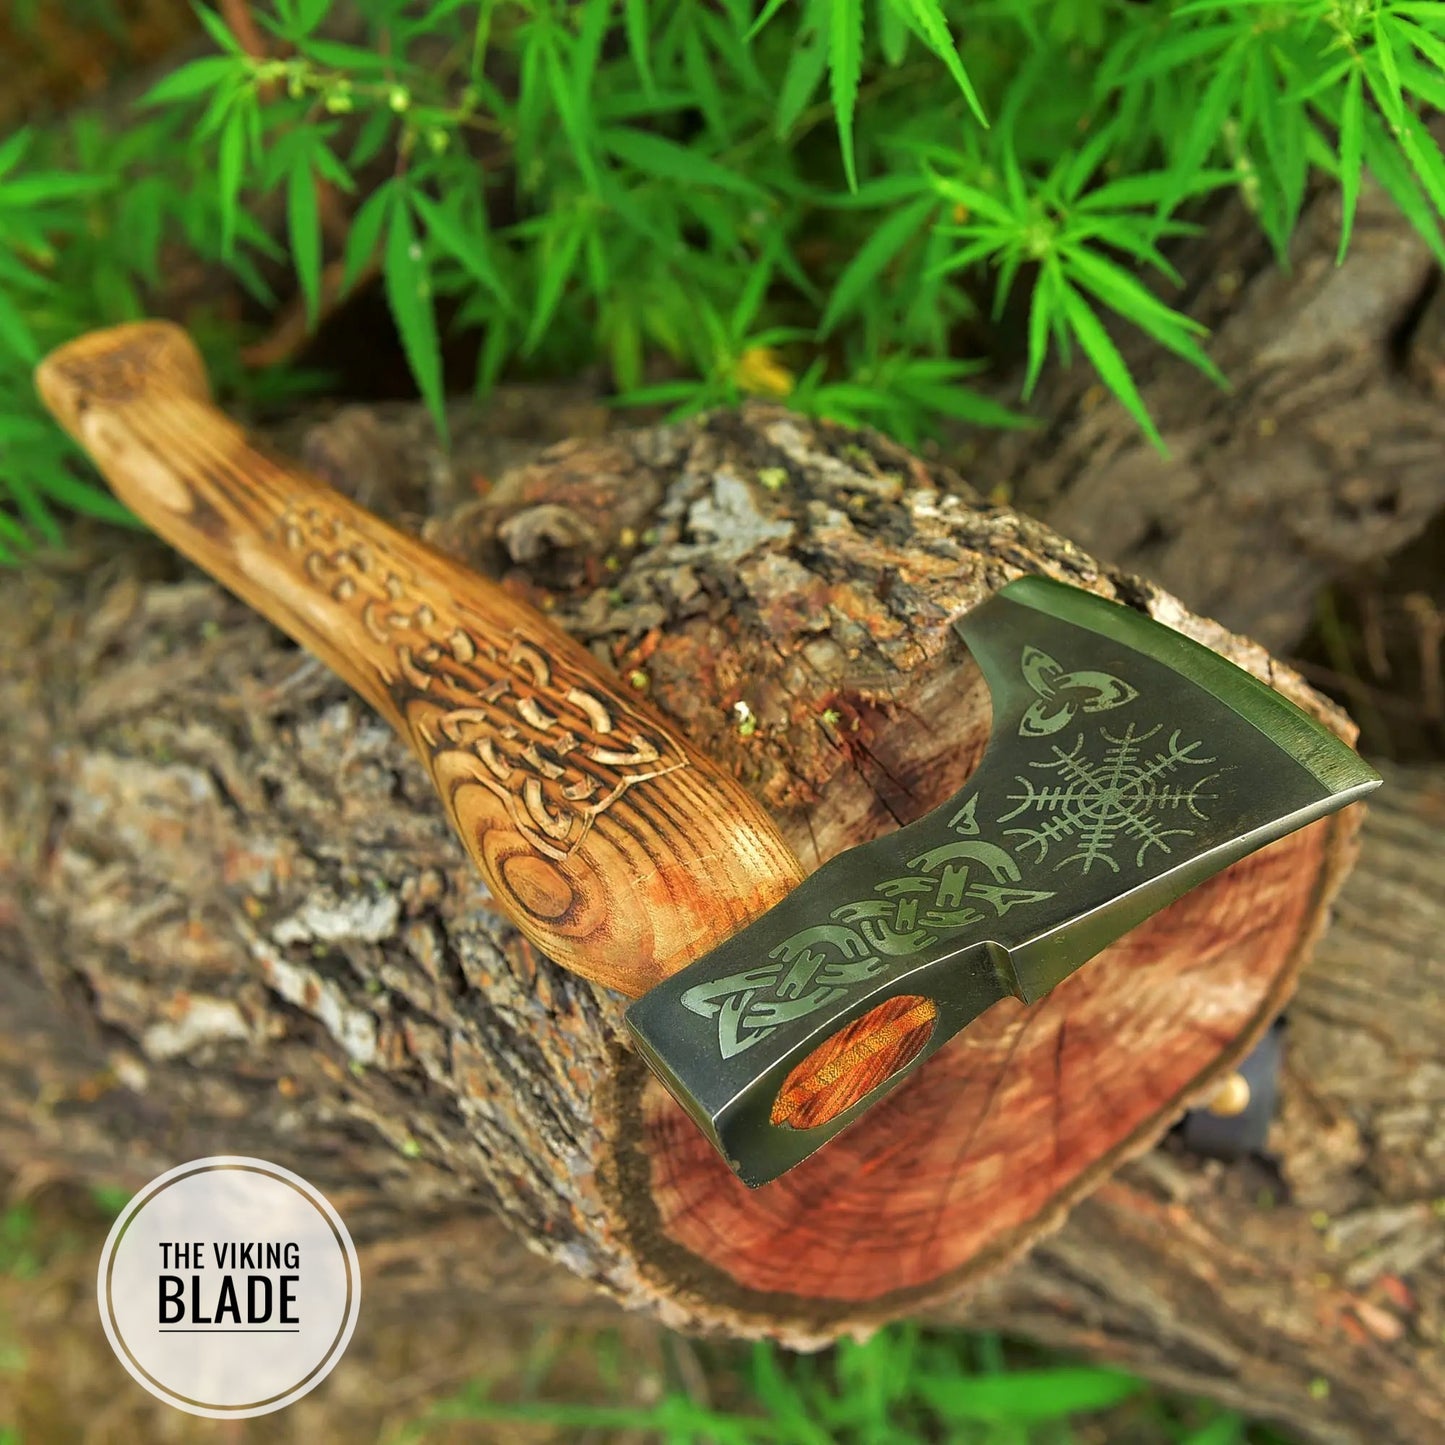 Custom Hand Forged Carbon Steel Viking Axe With Leather Sheath |The Viking Blade|